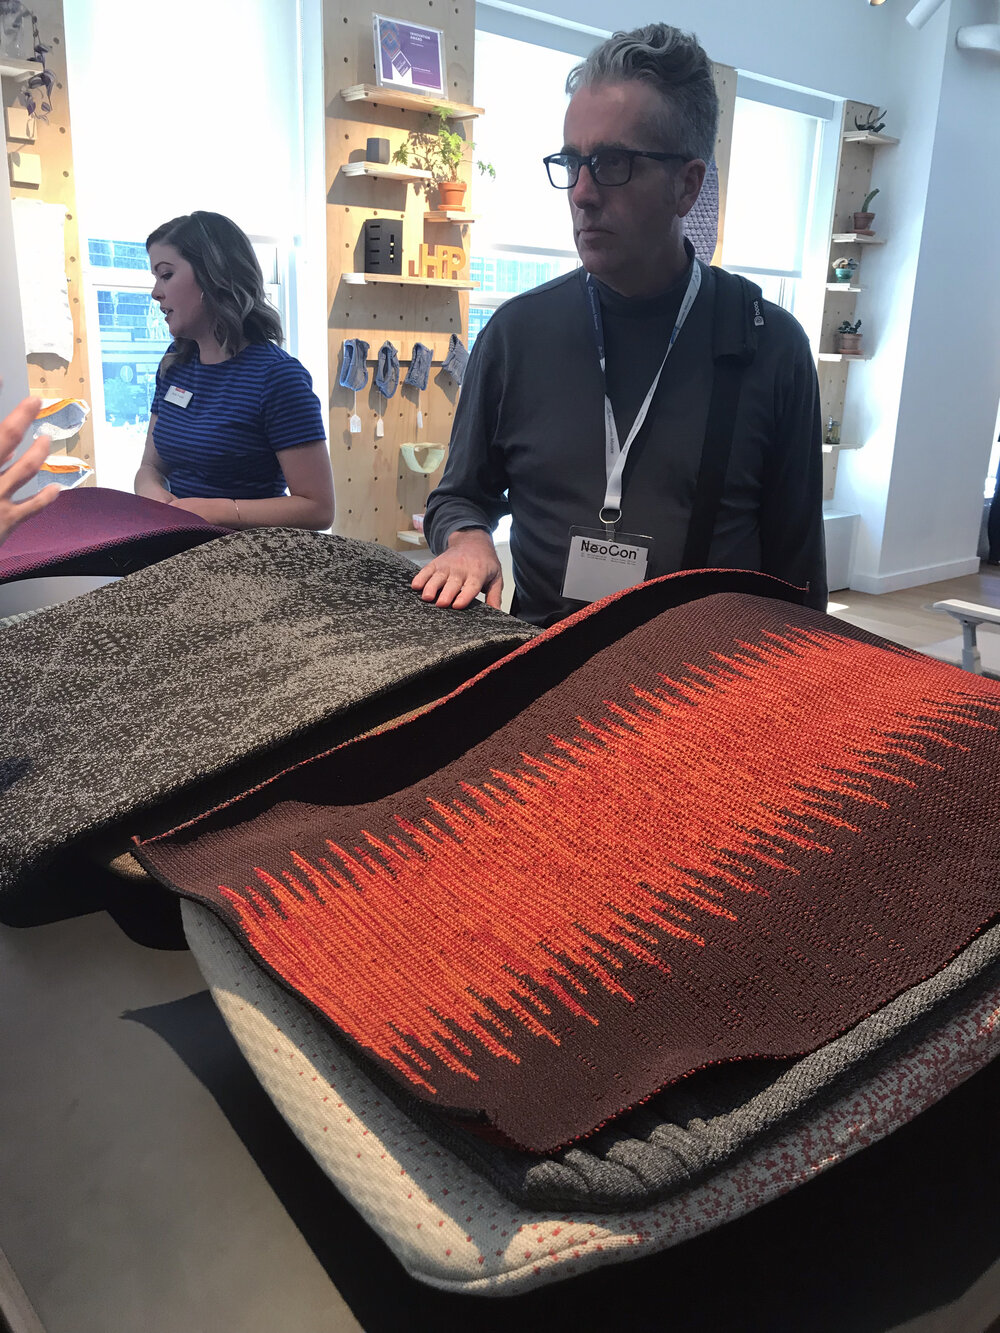  Formation Partner, Bob Henshaw evaluates  Haworth Digital Knit  office chair back samples while learning more about the technology. 